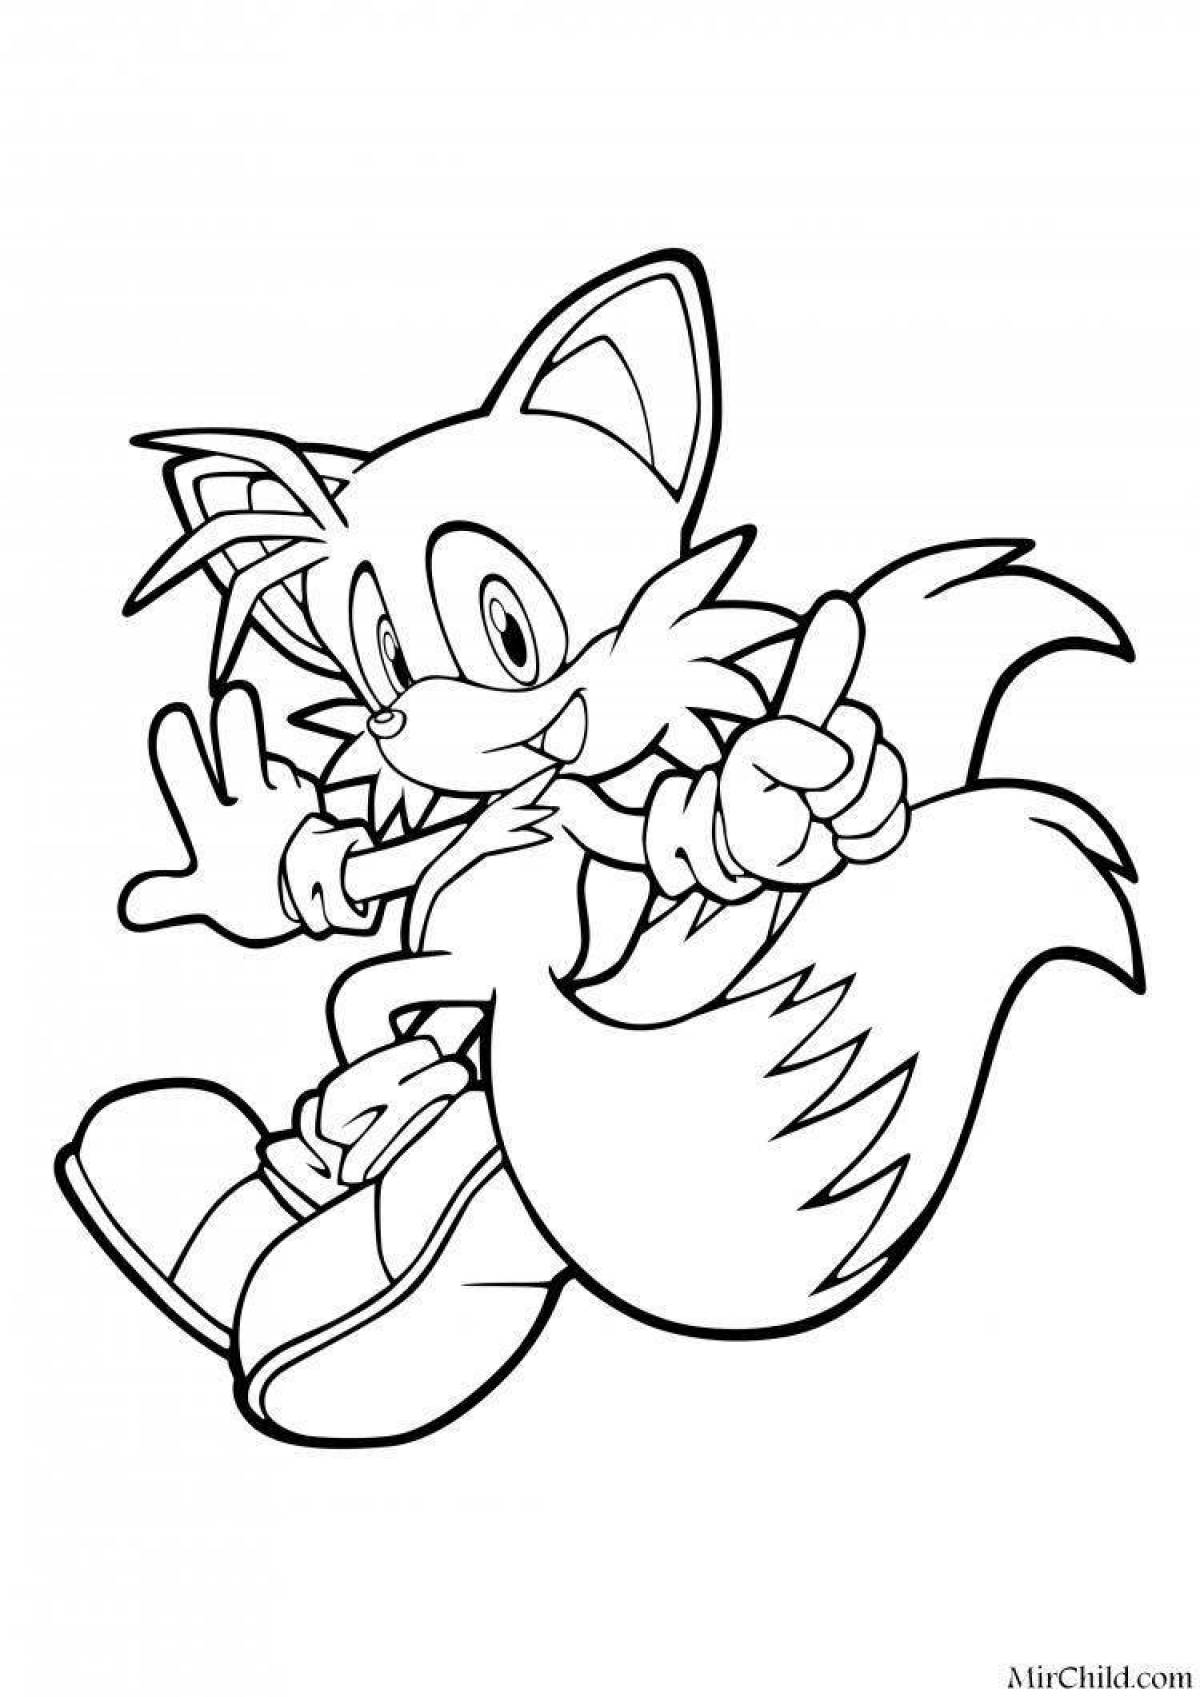 Glowing sonic and tails coloring page